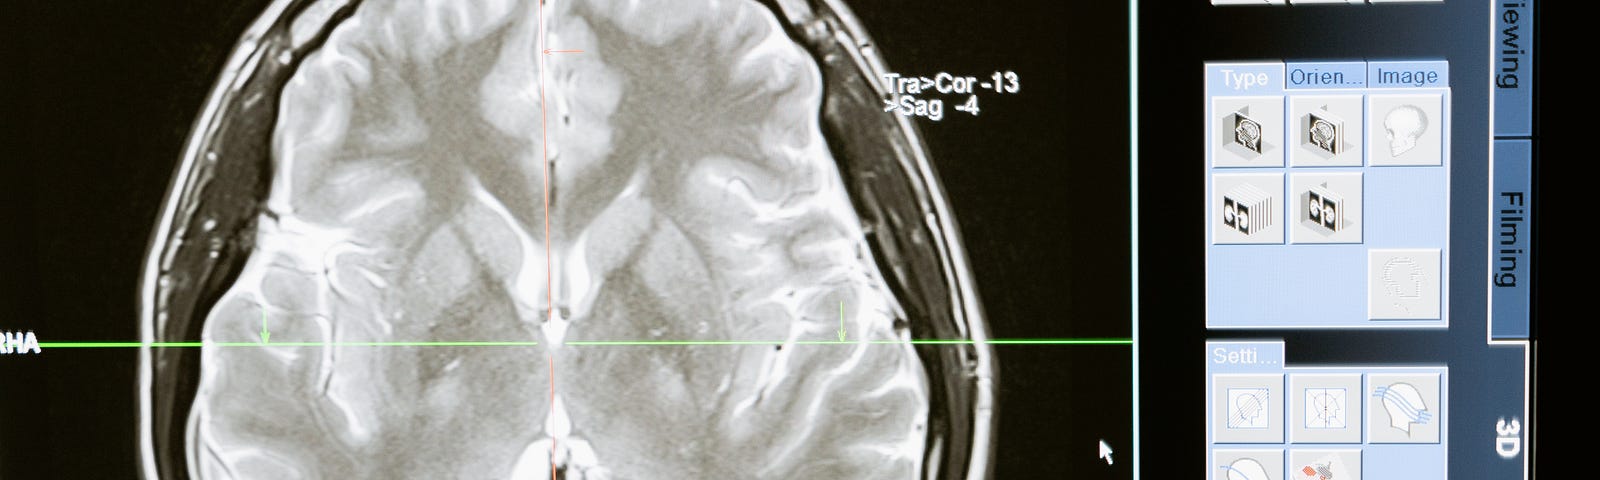 Image scan of the brain